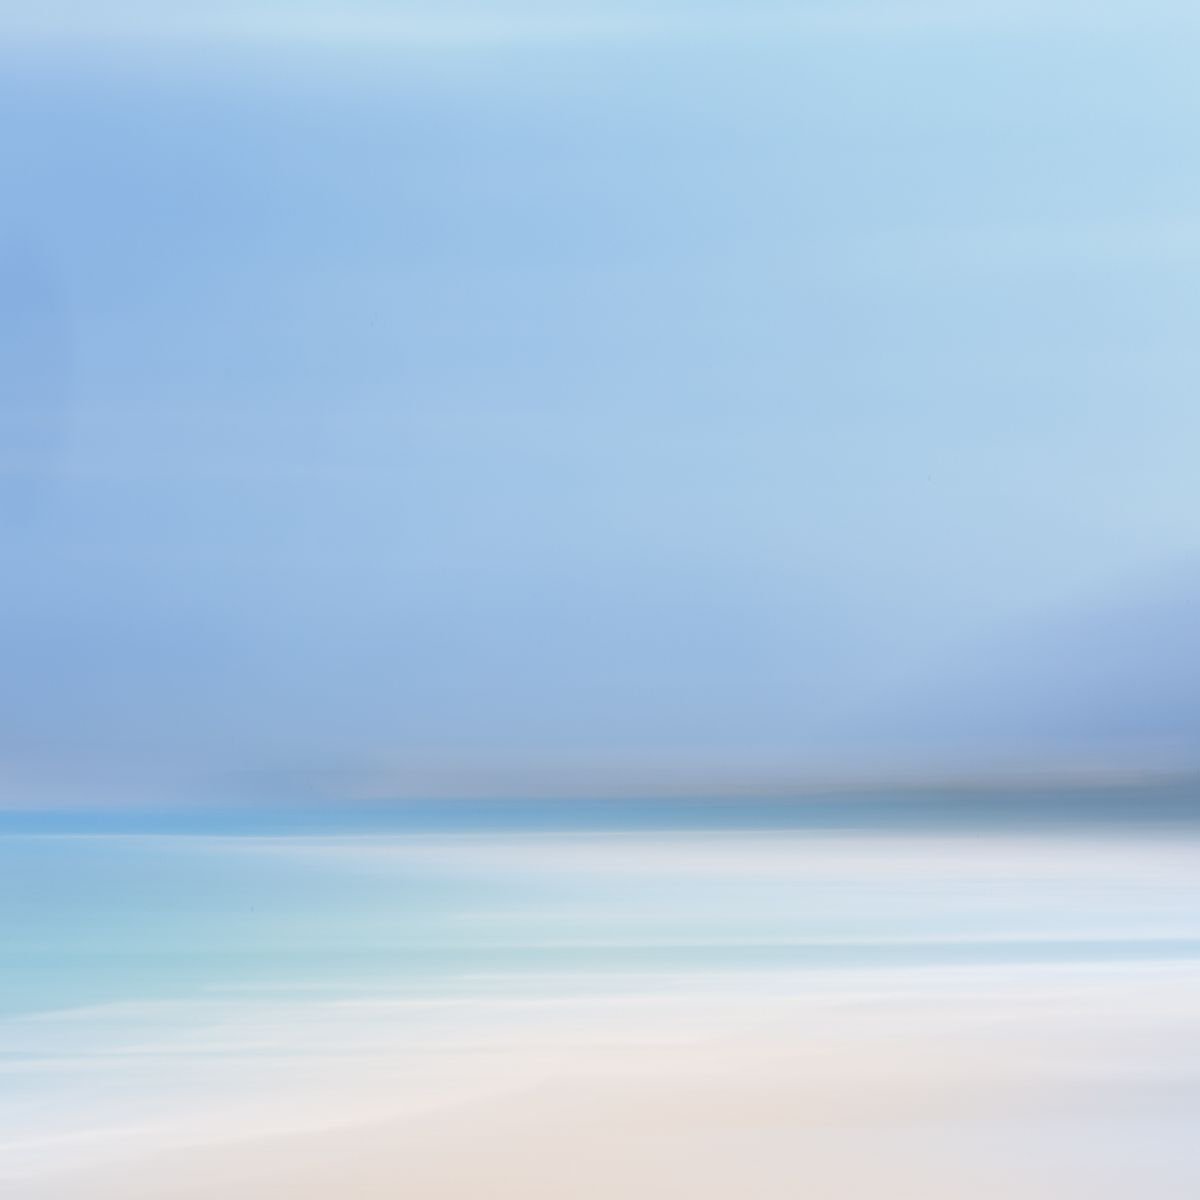 Hebridean Skies - Extra large impressionist style beach abstract by Lynne Douglas